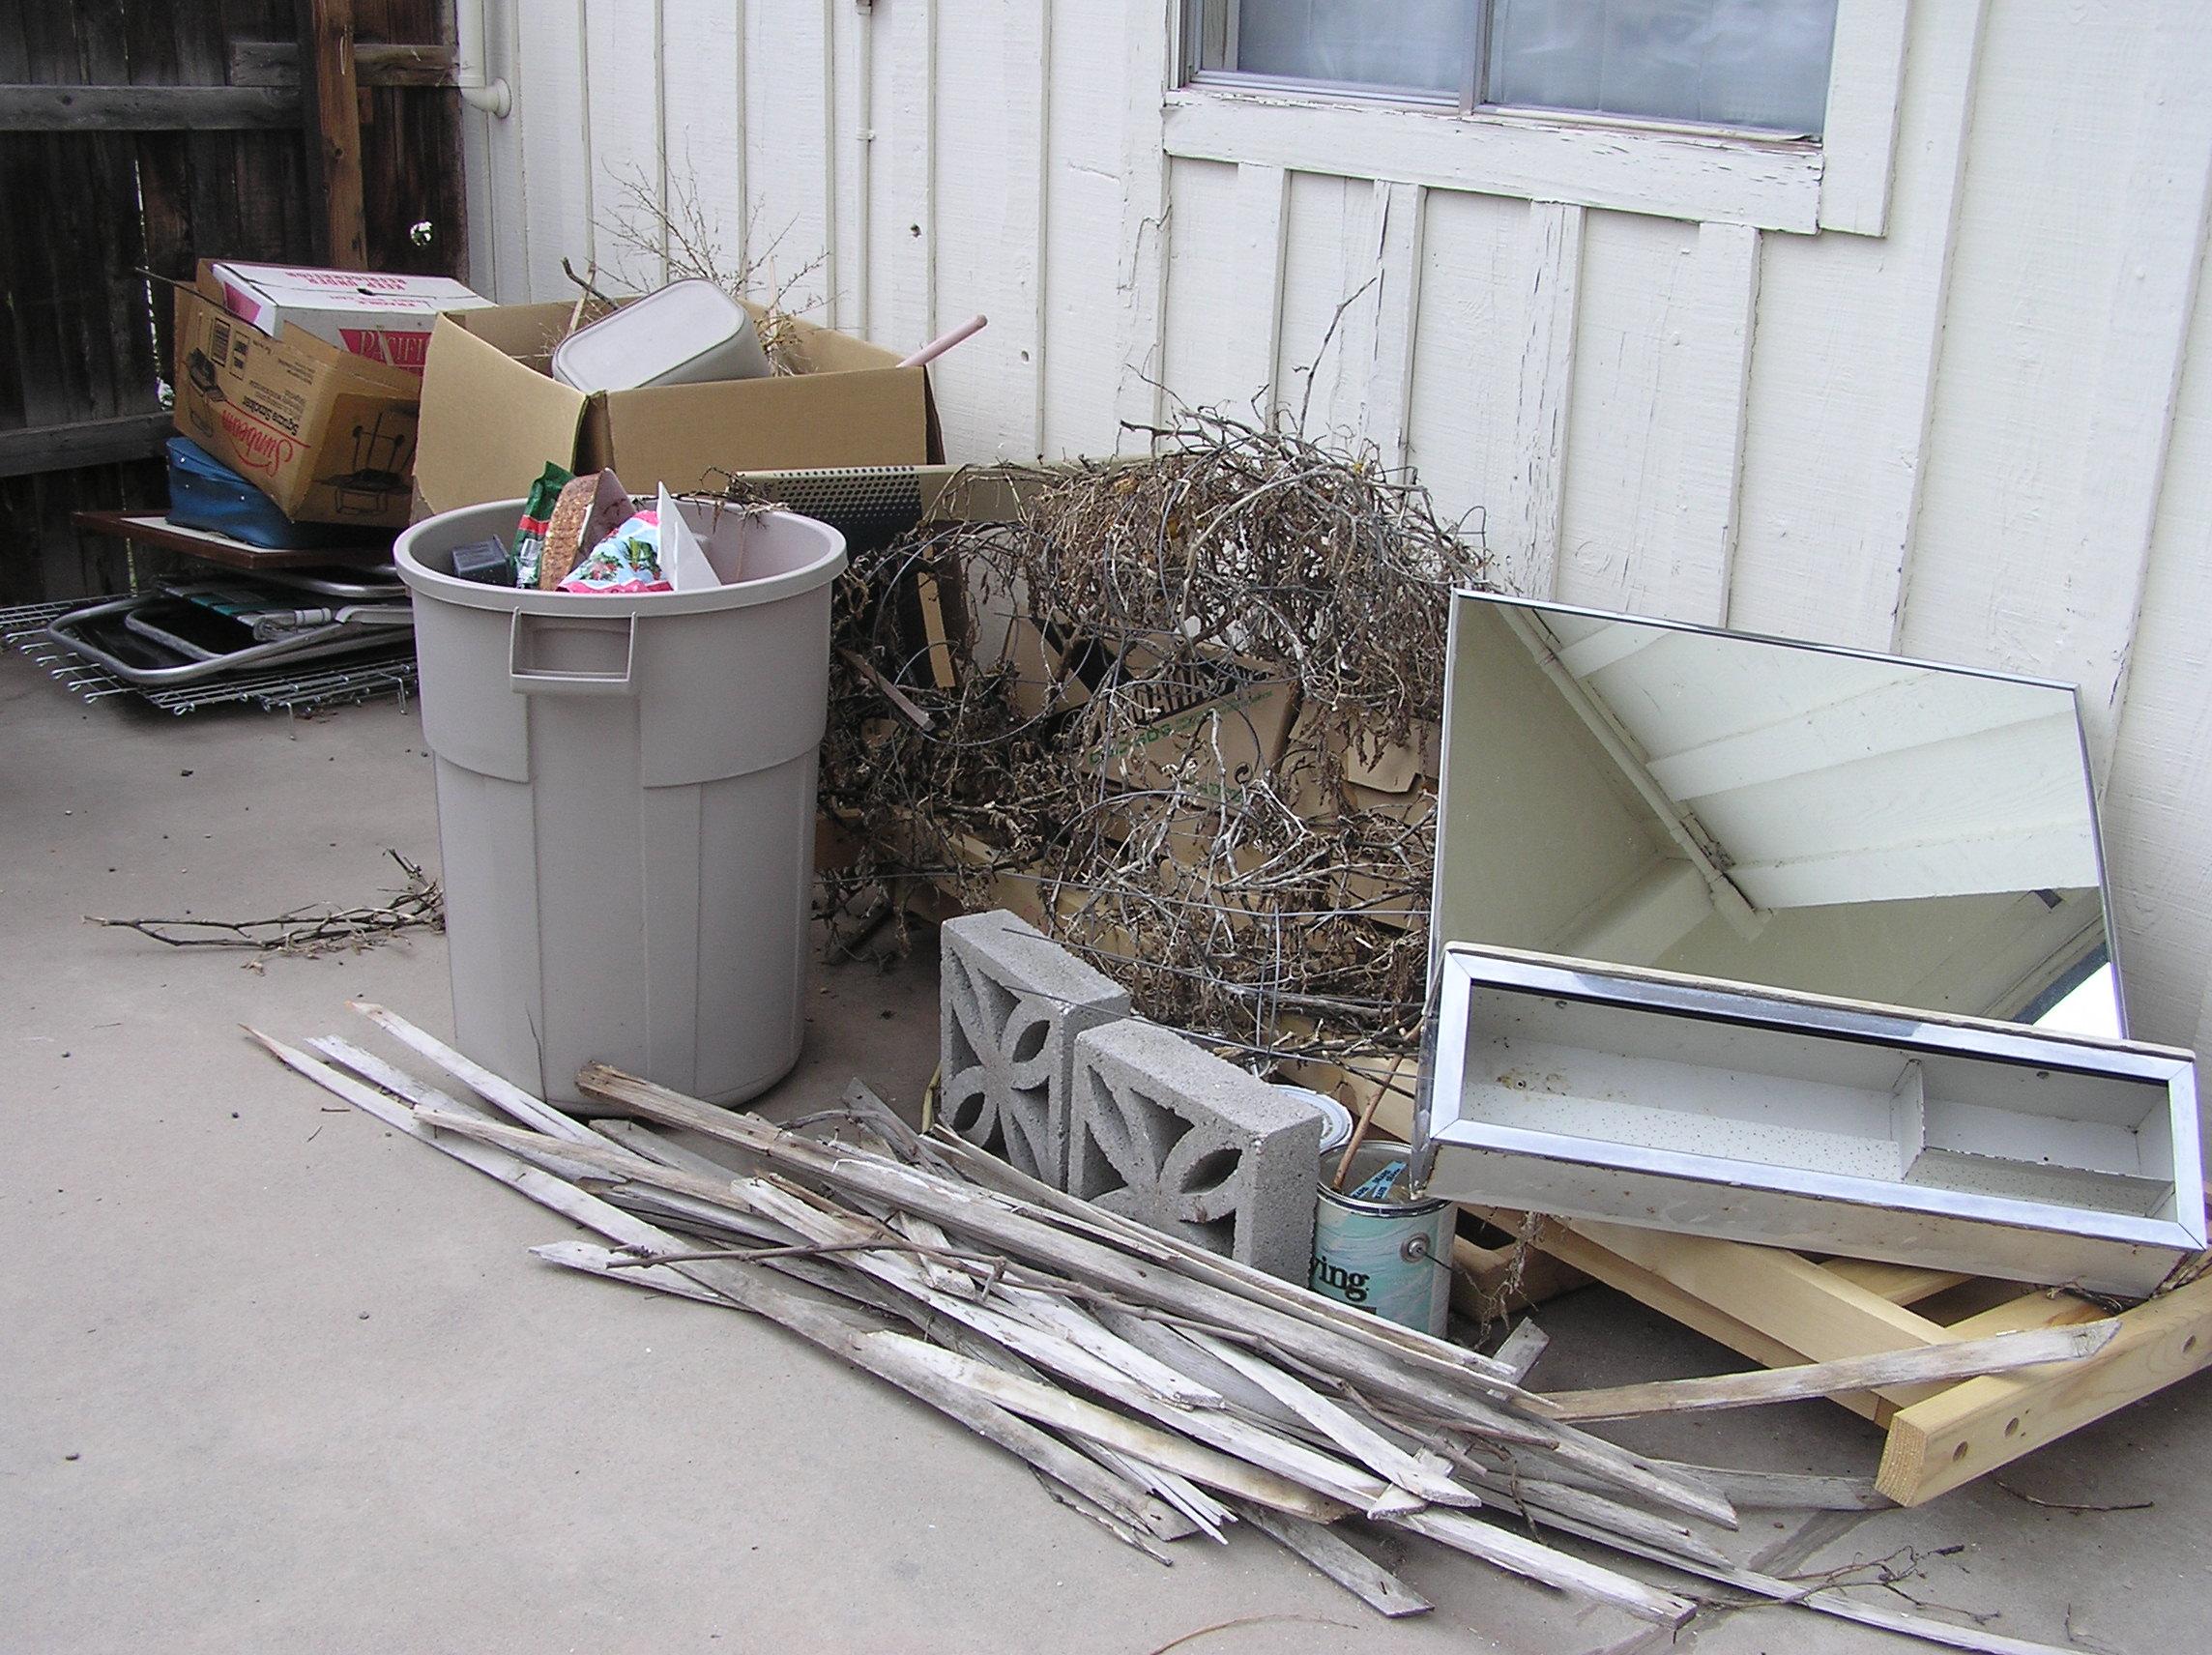 24/7 Haul called for Residential Junk Removal 